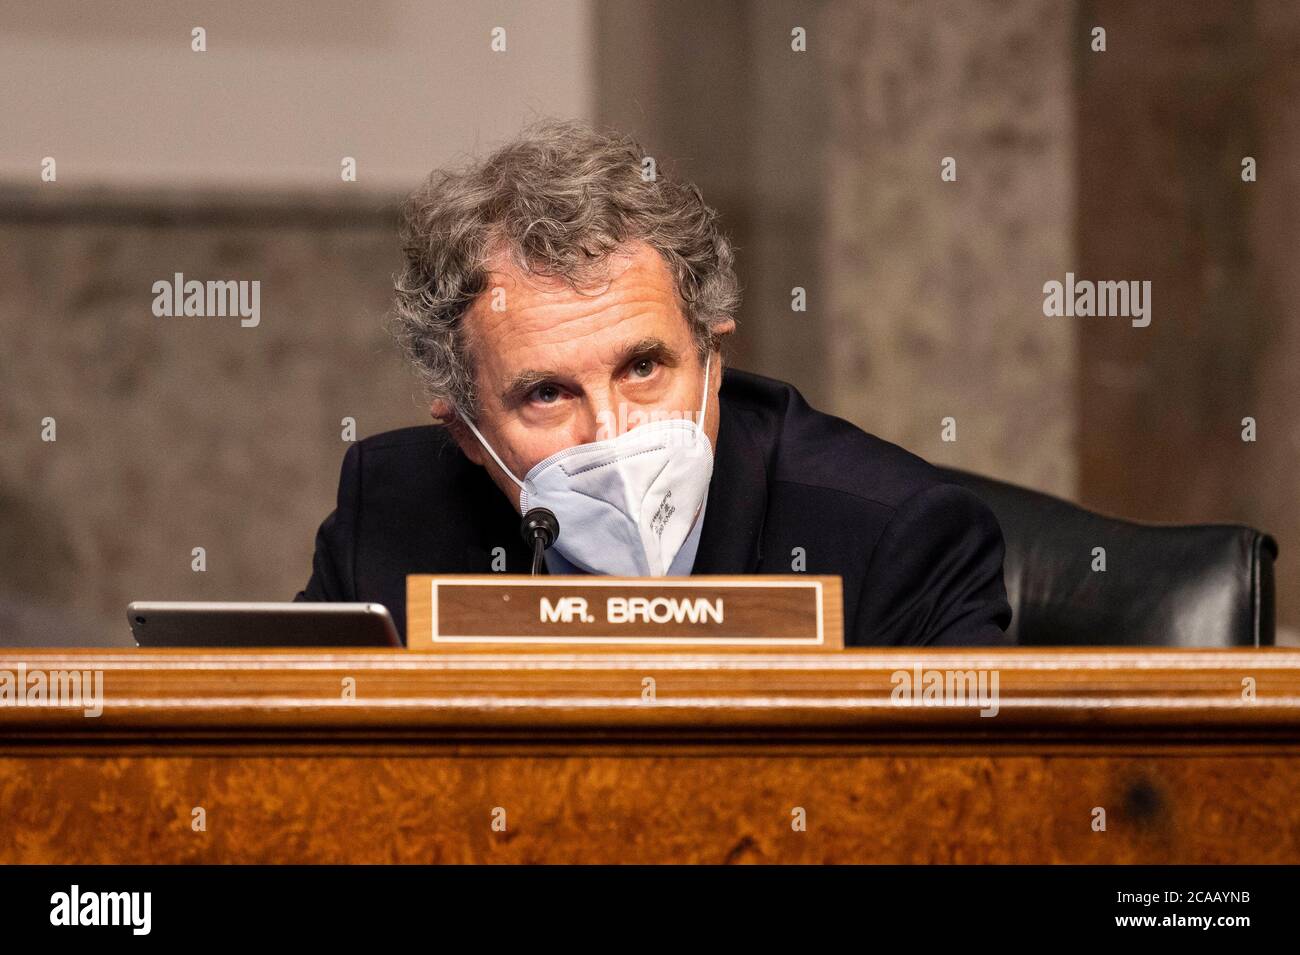 Washington, DC, USA. 5th Aug, 2020. August 5, 2020 - Washington, DC, United States: U.S. Senator SHERROD BROWN (D-OH) speaking at a Senate Banking, Housing, and Urban Affairs committee business meeting to consider the nominations of Hester Maria Peirce, of Ohio, and Caroline A. Crenshaw, of the District of Columbia, both to be a Member of the Securities and Exchange Commission, and Kyle Hauptman, of Maine, to be a Member of the National Credit Union Administration Board. Credit: Michael Brochstein/ZUMA Wire/Alamy Live News Stock Photo